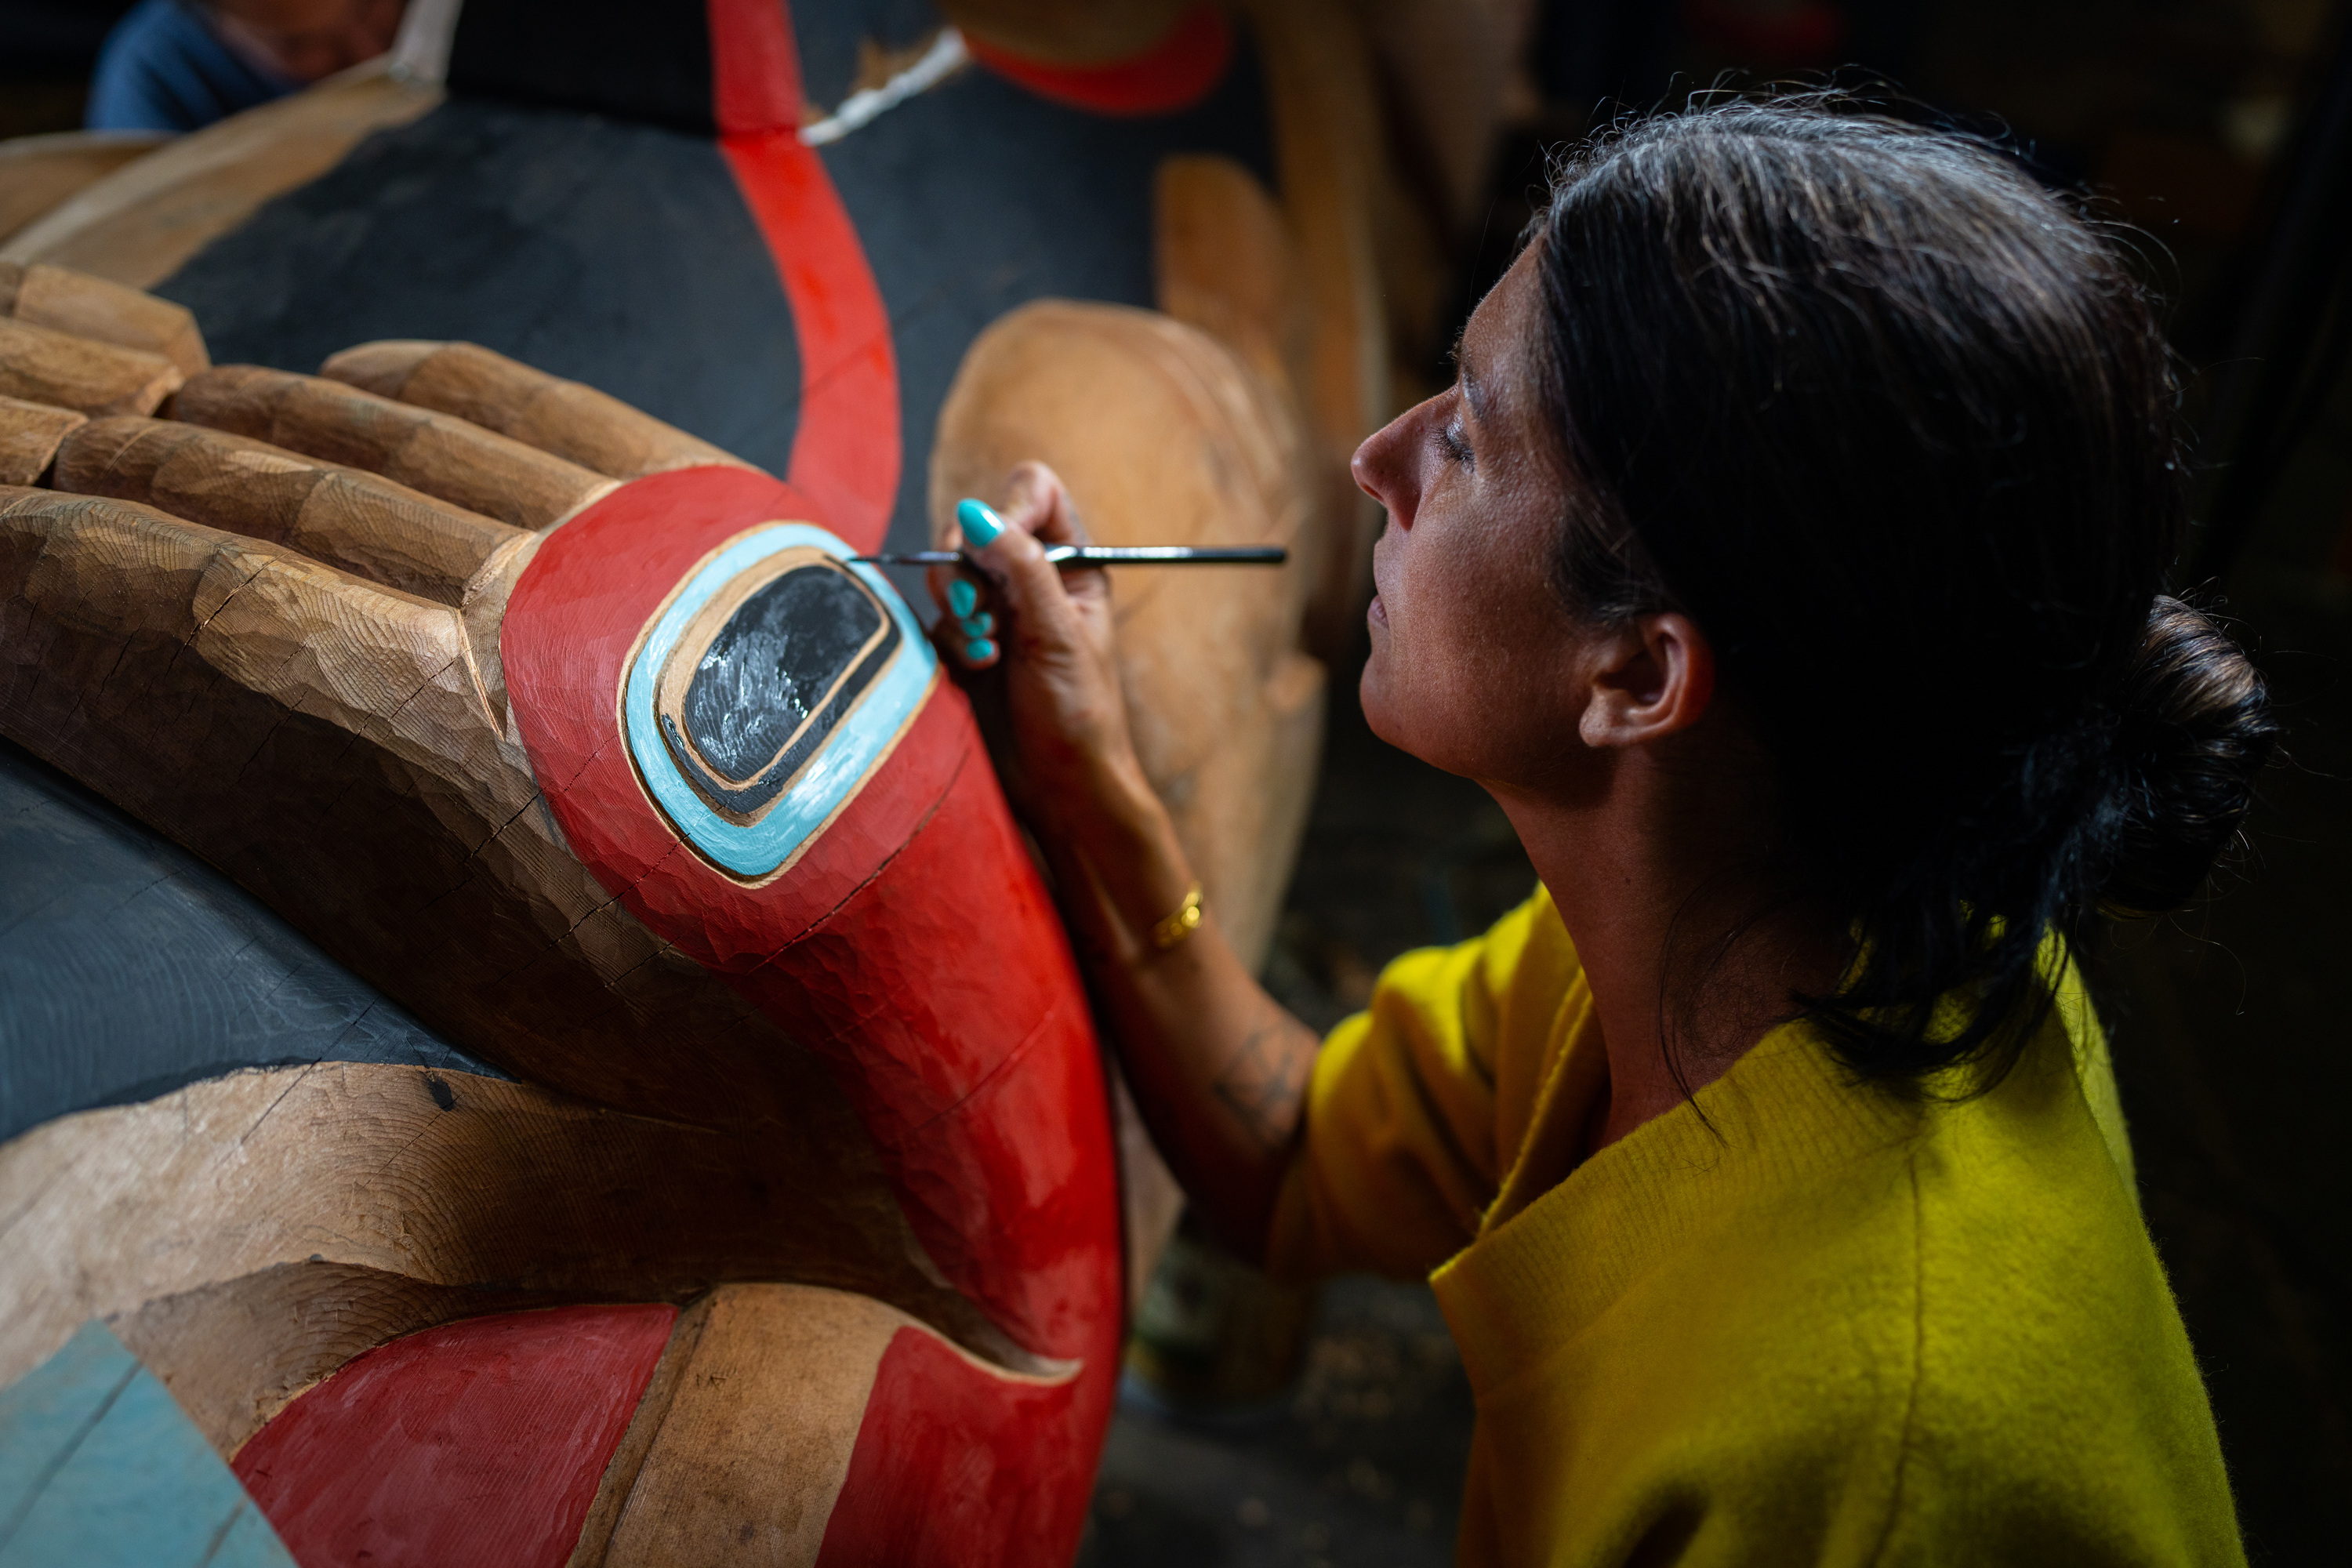 An artist paints a Kaagwaantaan totem pole multiple colors, including red, blue, and black.